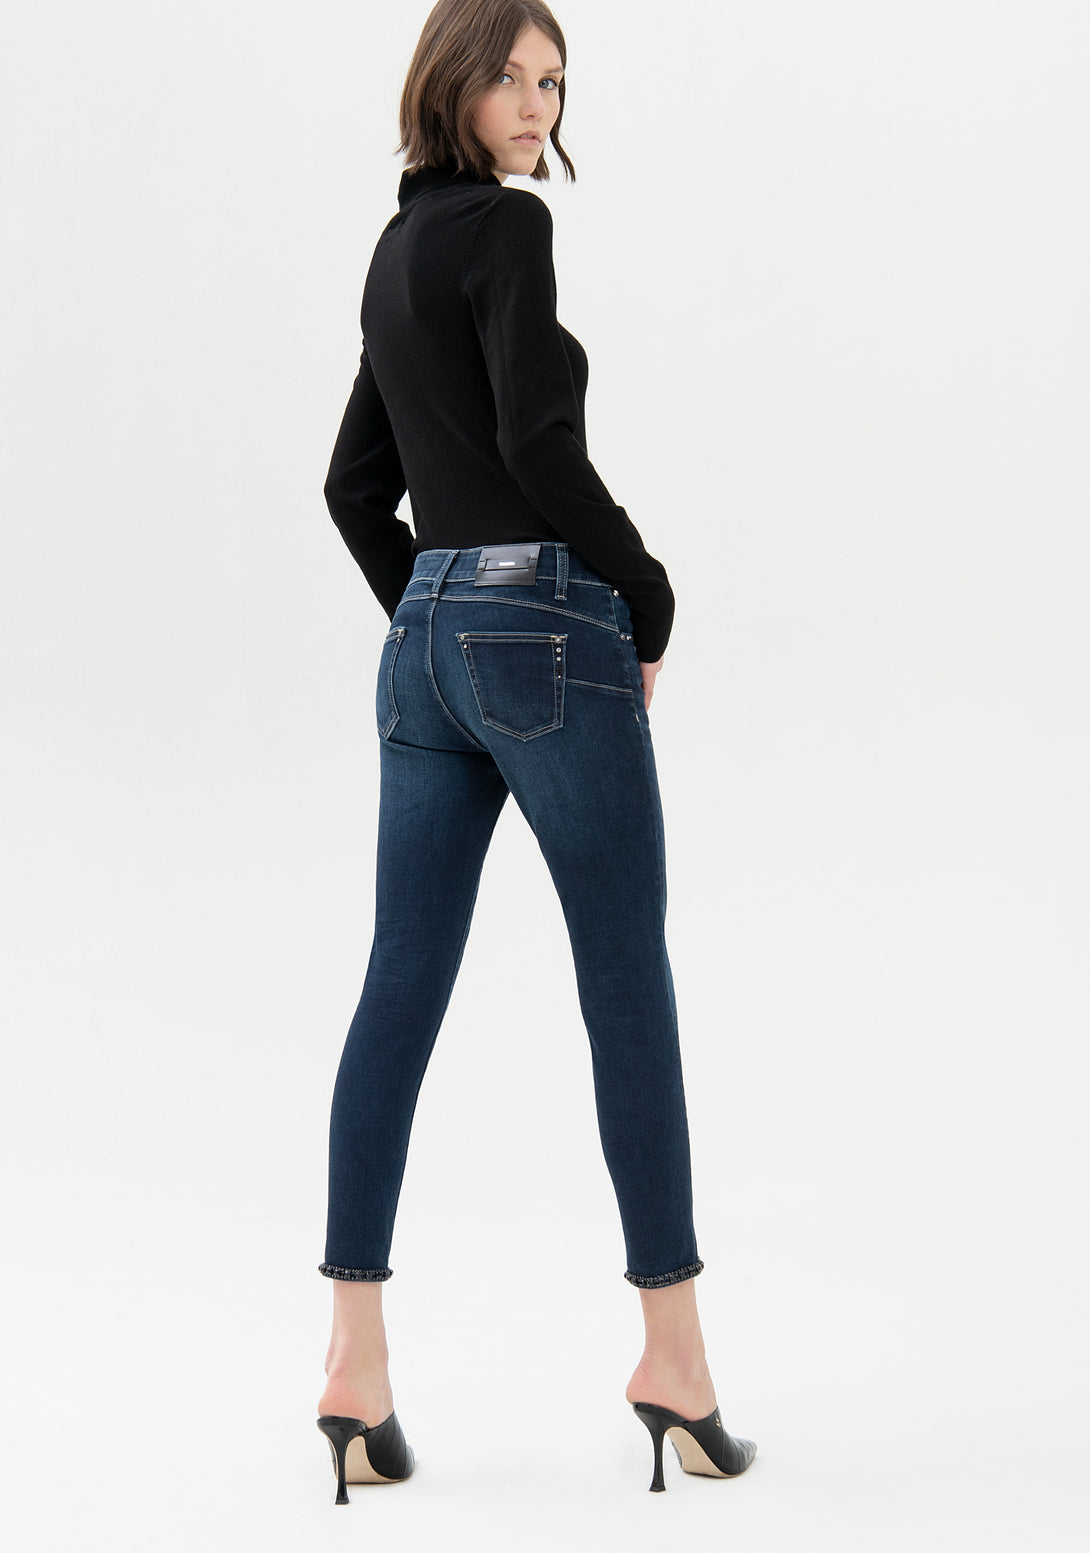 Jeans skinny fit cropped with push-up effect made in denim with dark wash